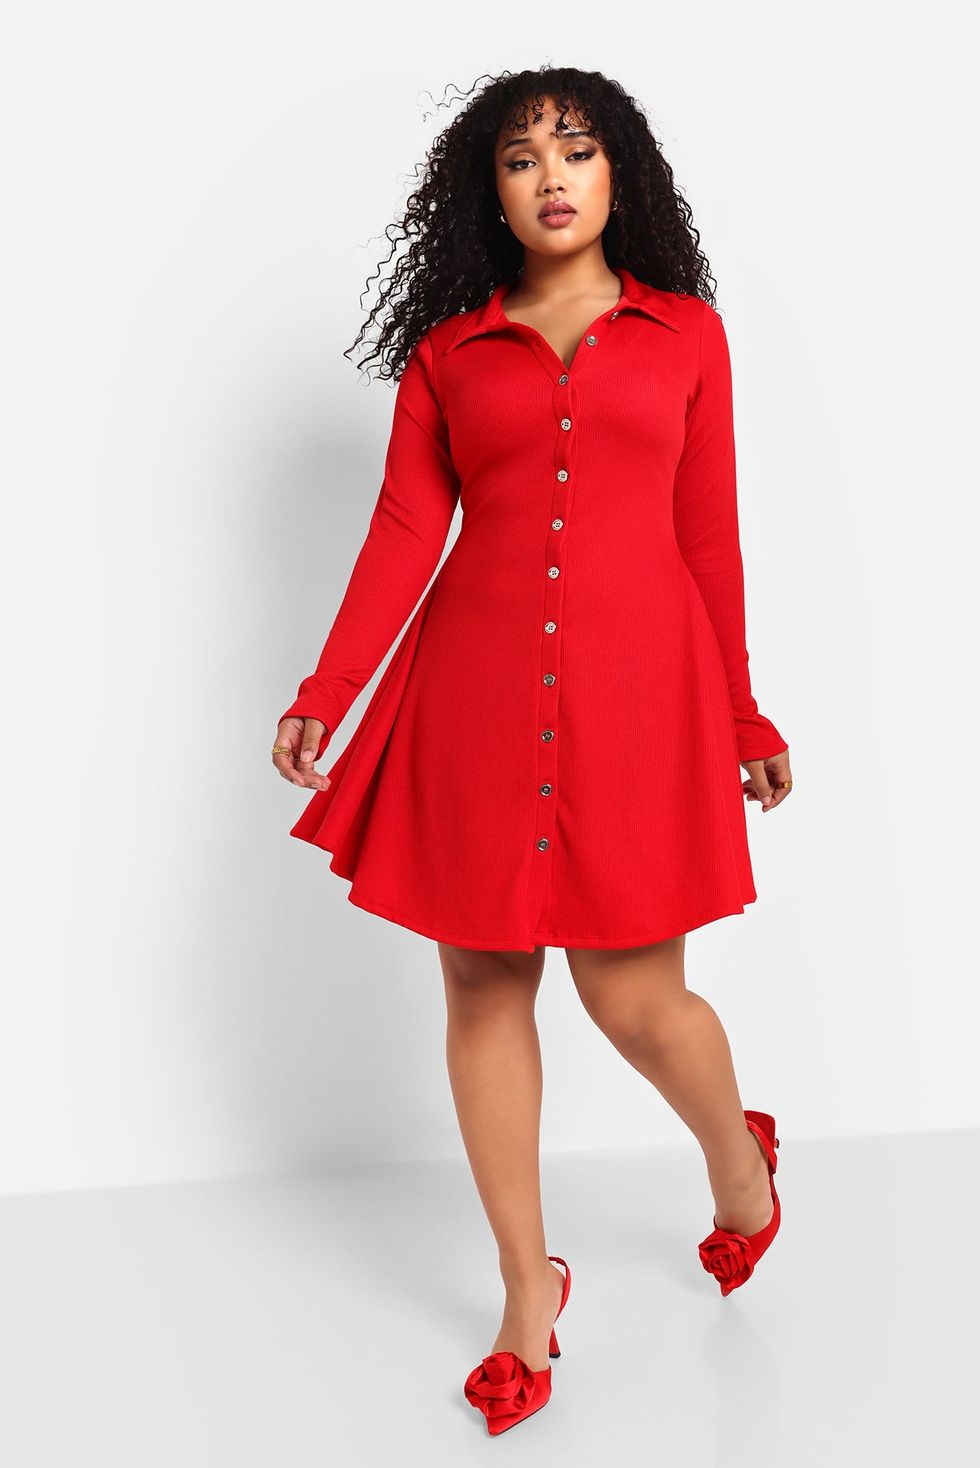 SKIM TWO PIECES CARDIGAN DRESS SET (RED) – Dress Code Chic Official